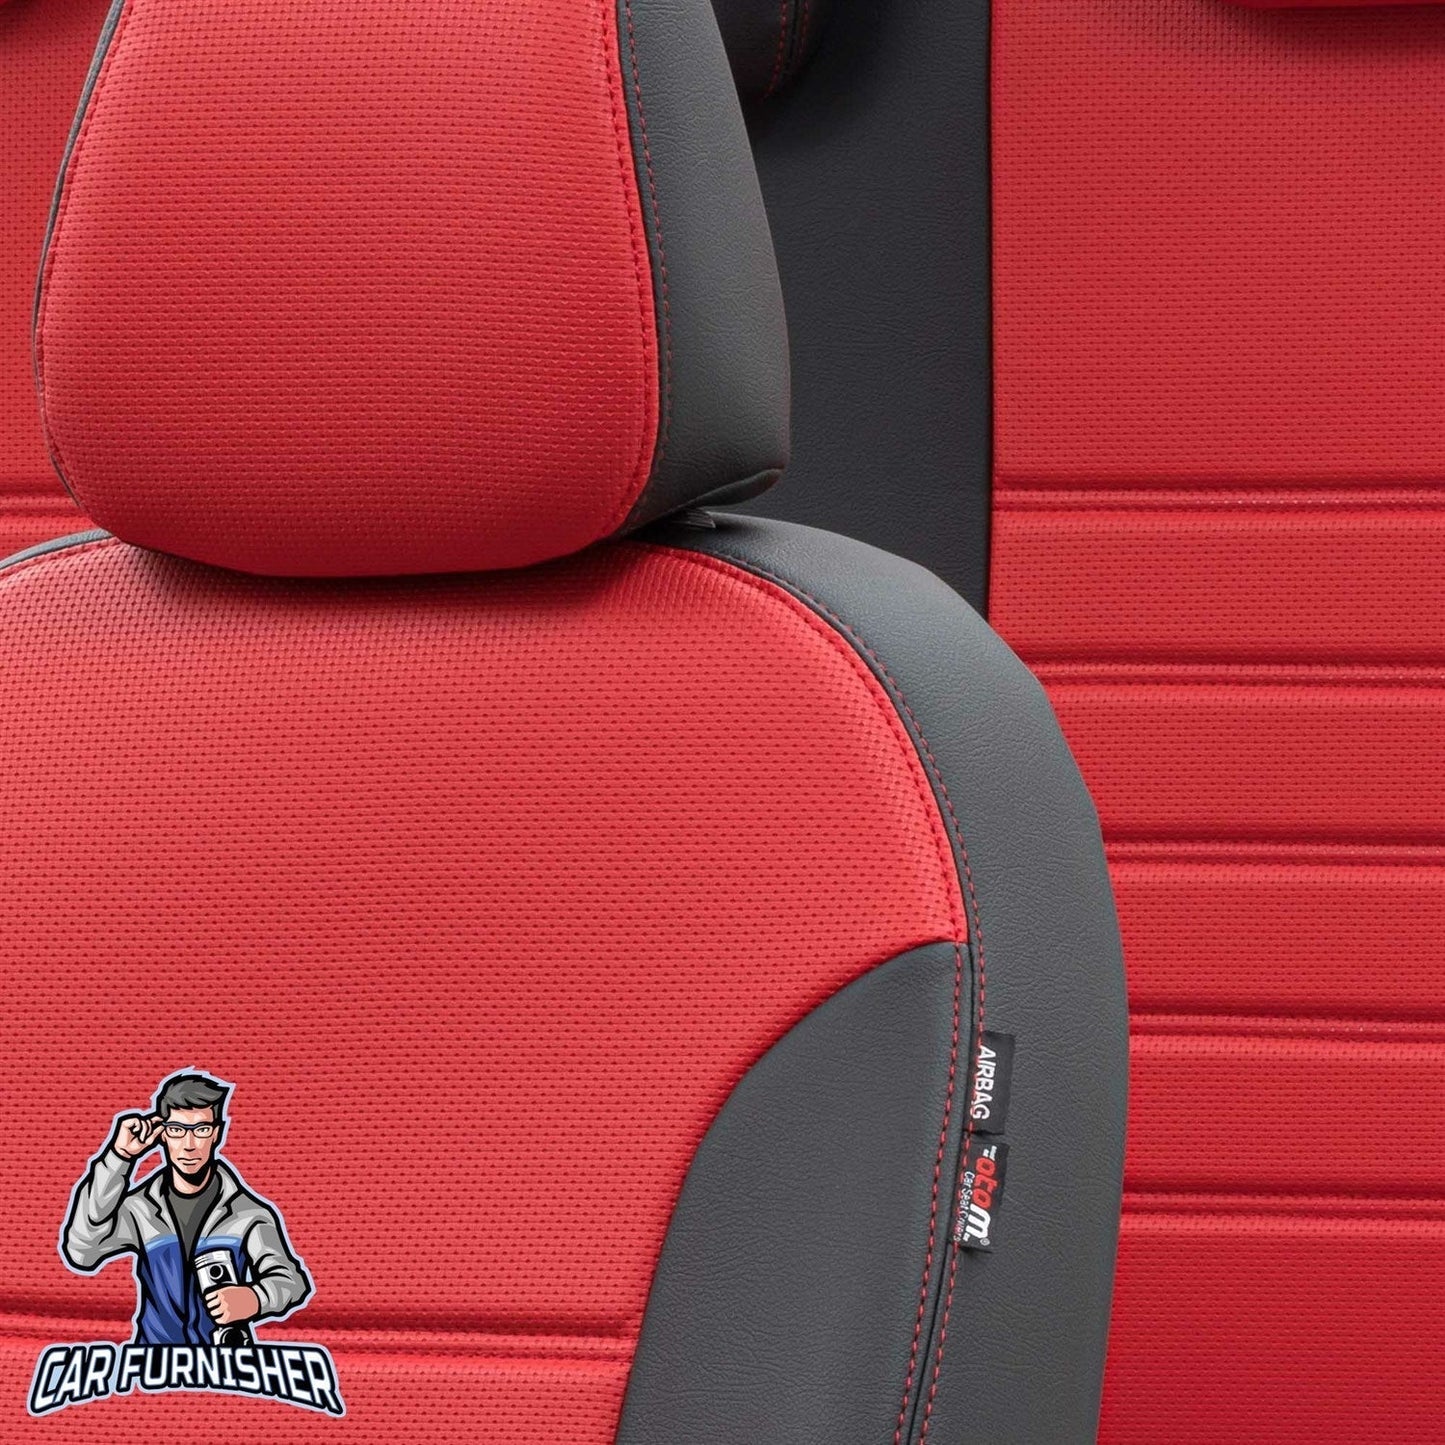 Ford Cargo Seat Cover New York Leather Design Red Leather